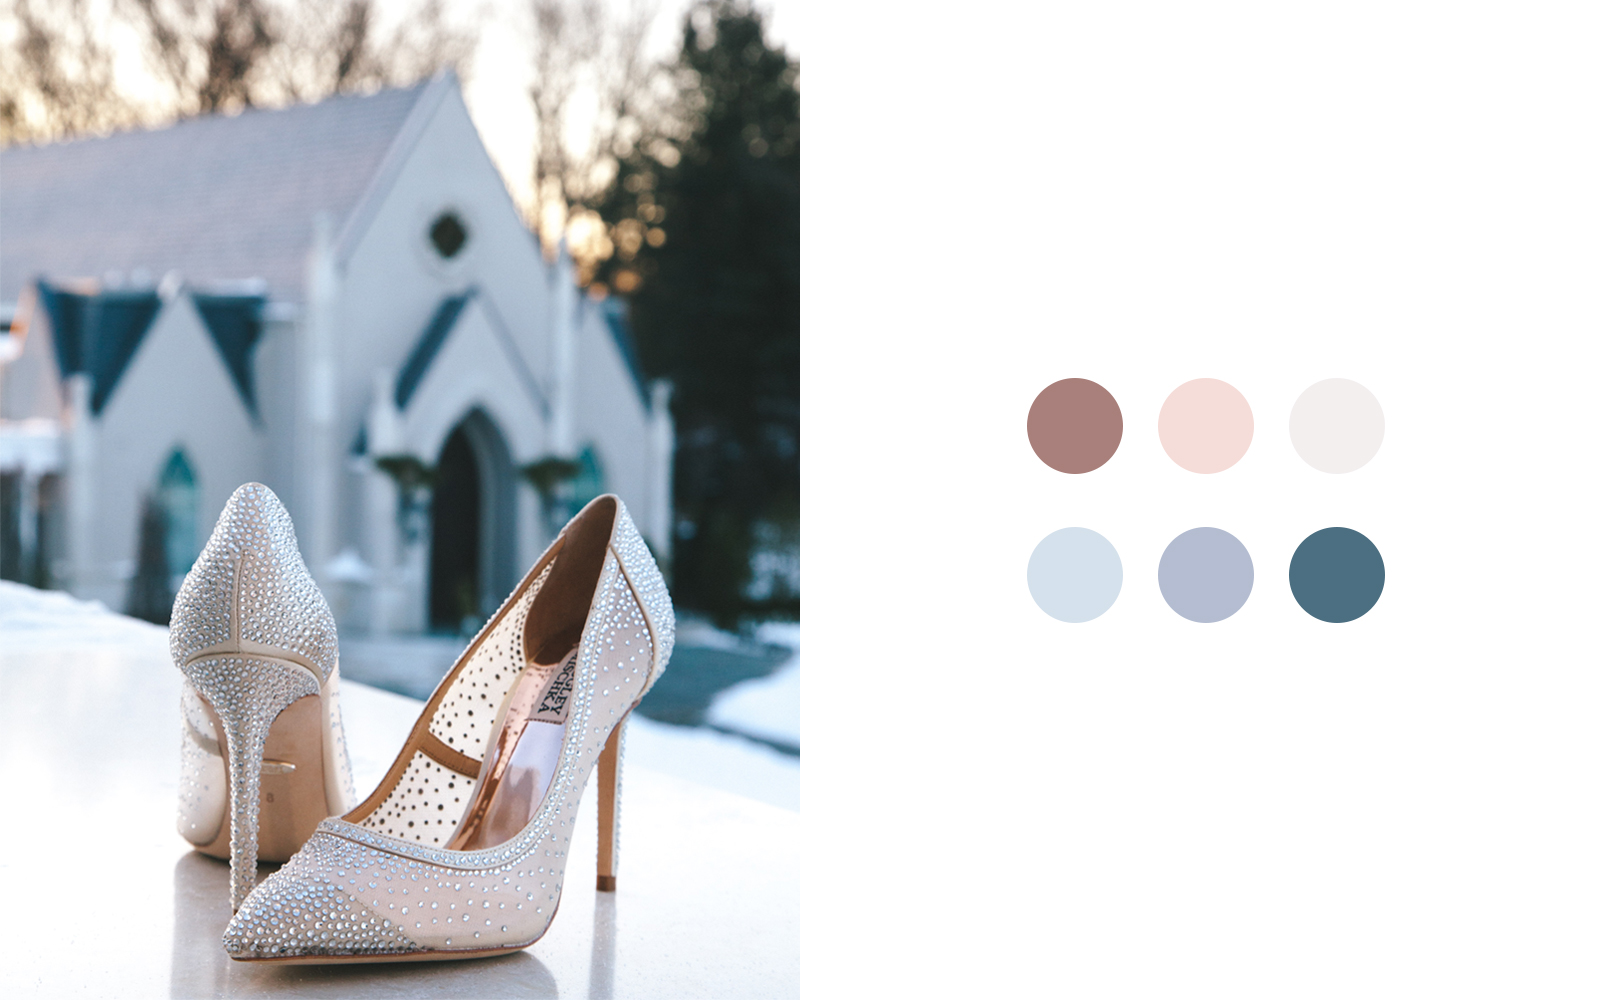 Color palette shown next to an image of wedding shoes in front of a chapel.